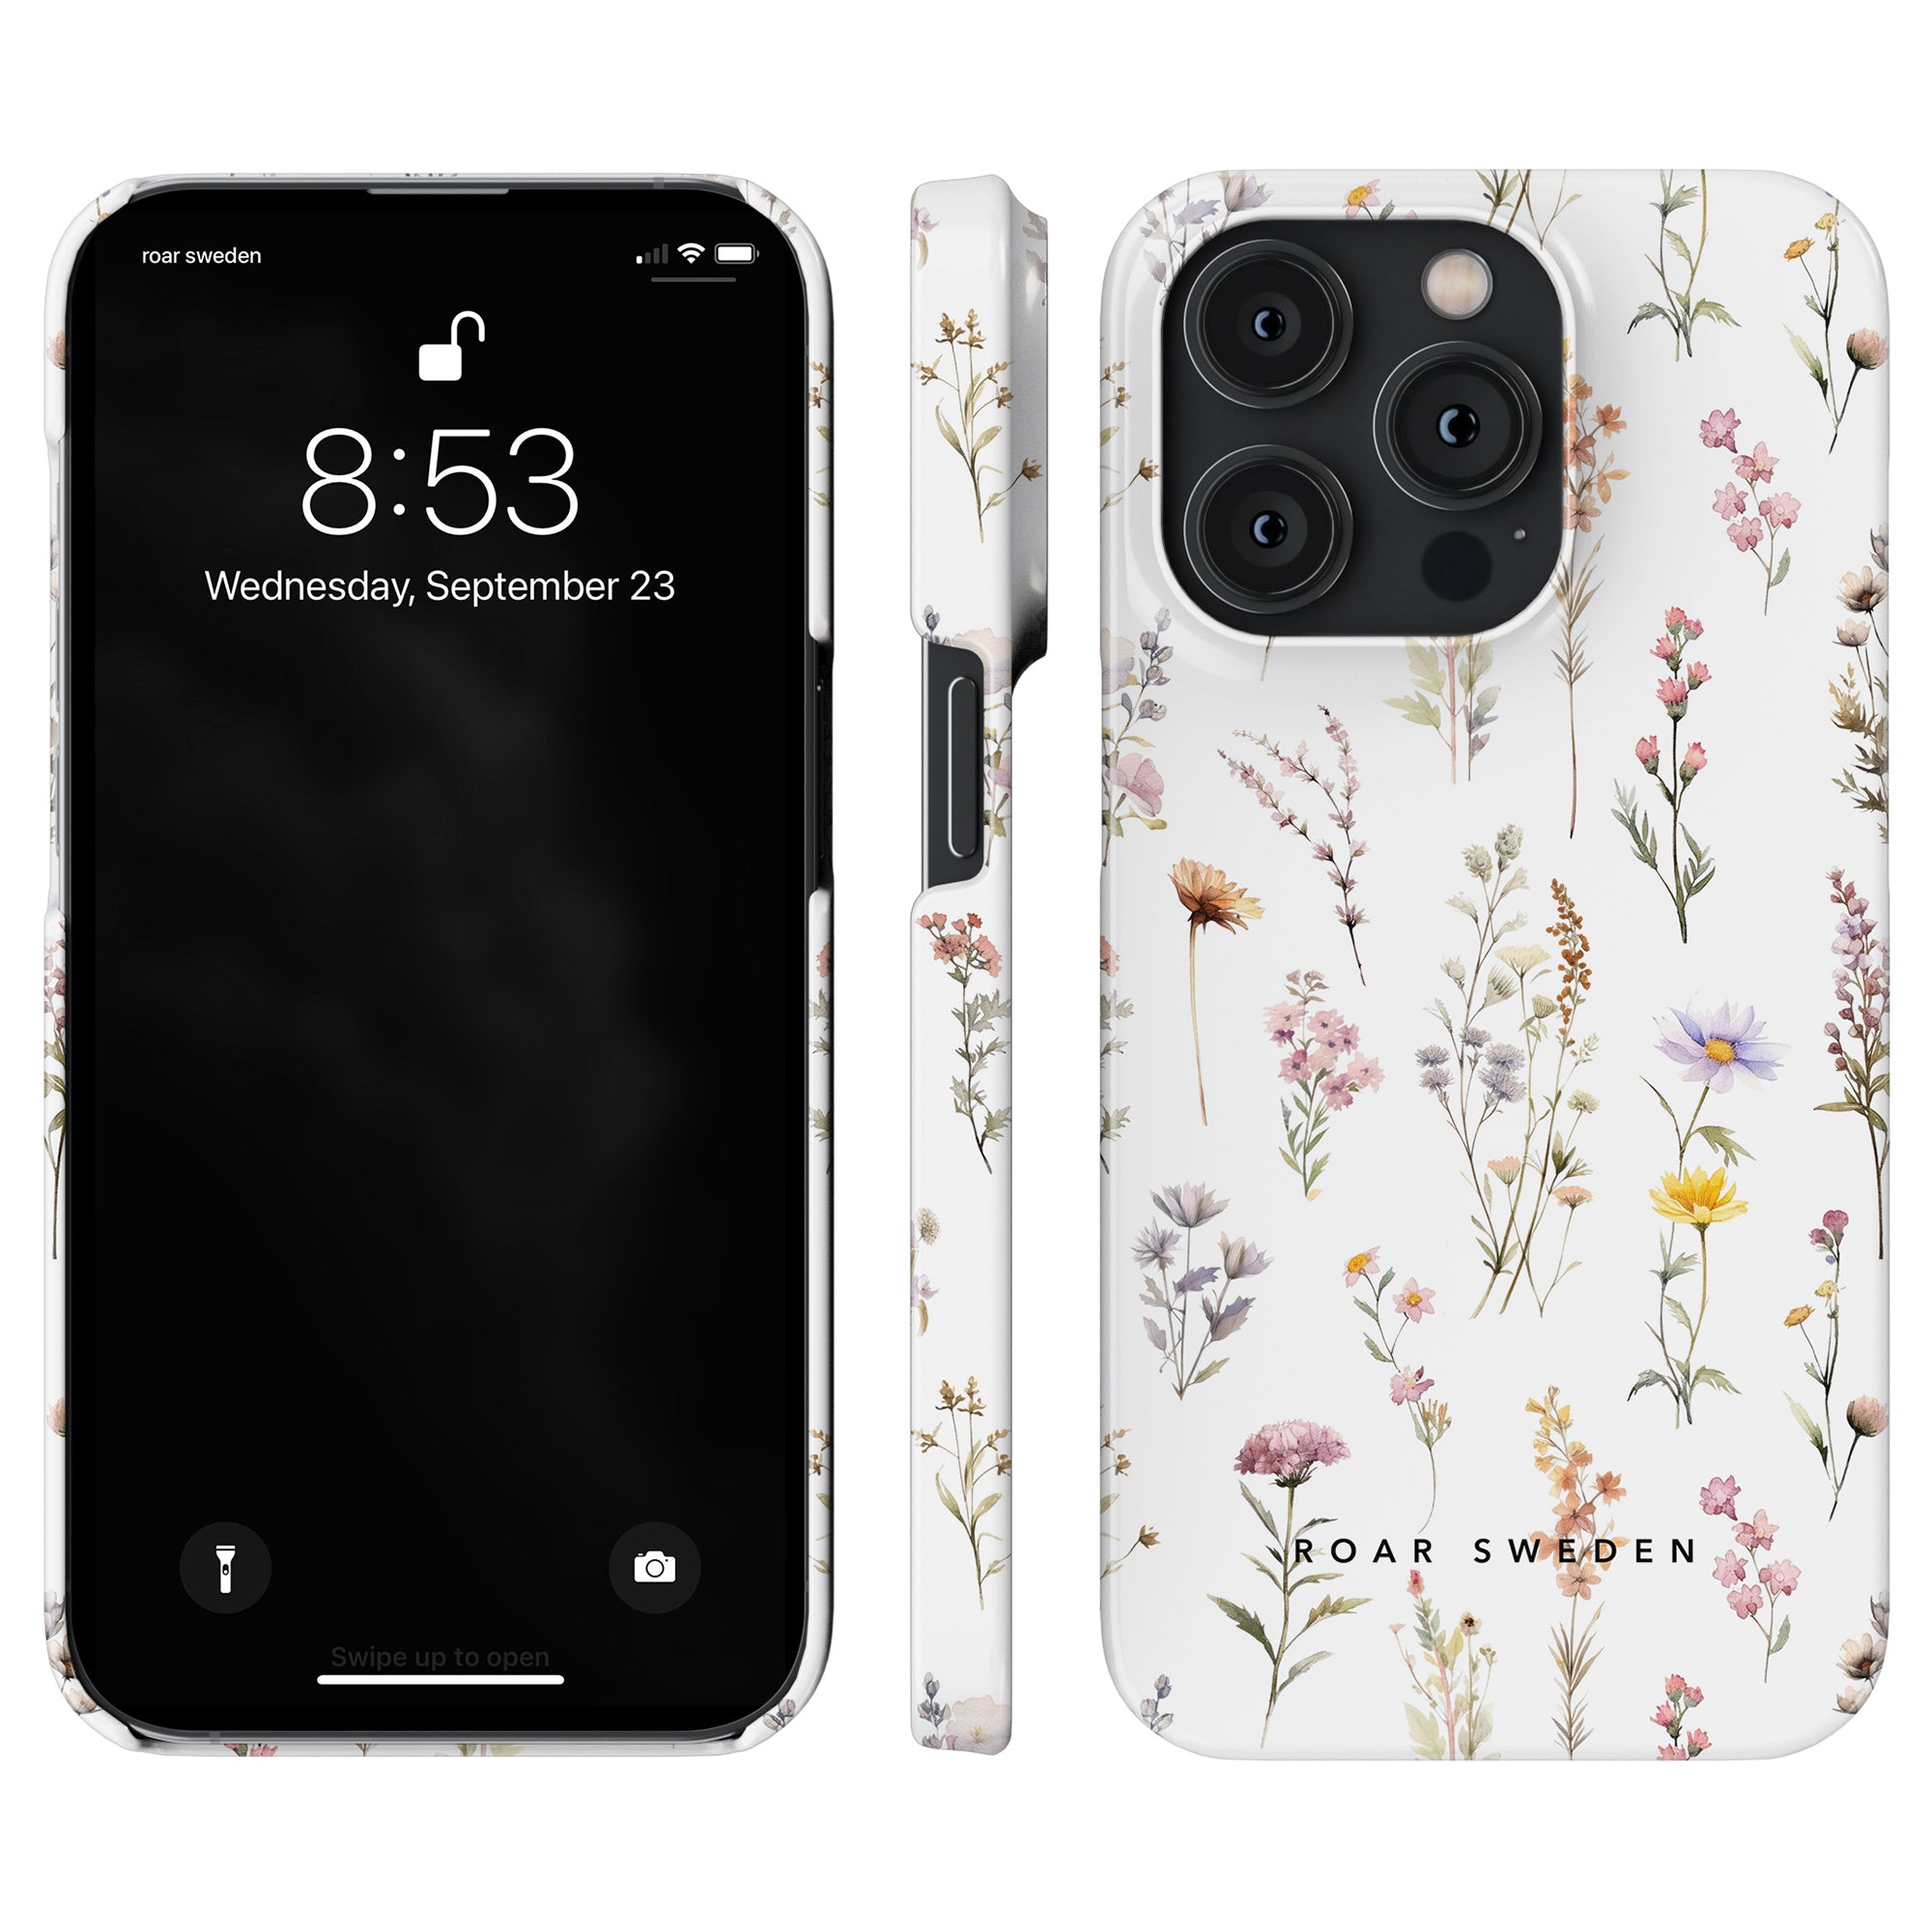 Black smartphone with a waterproof Wild Flowers - Slim case and matching phone grip.